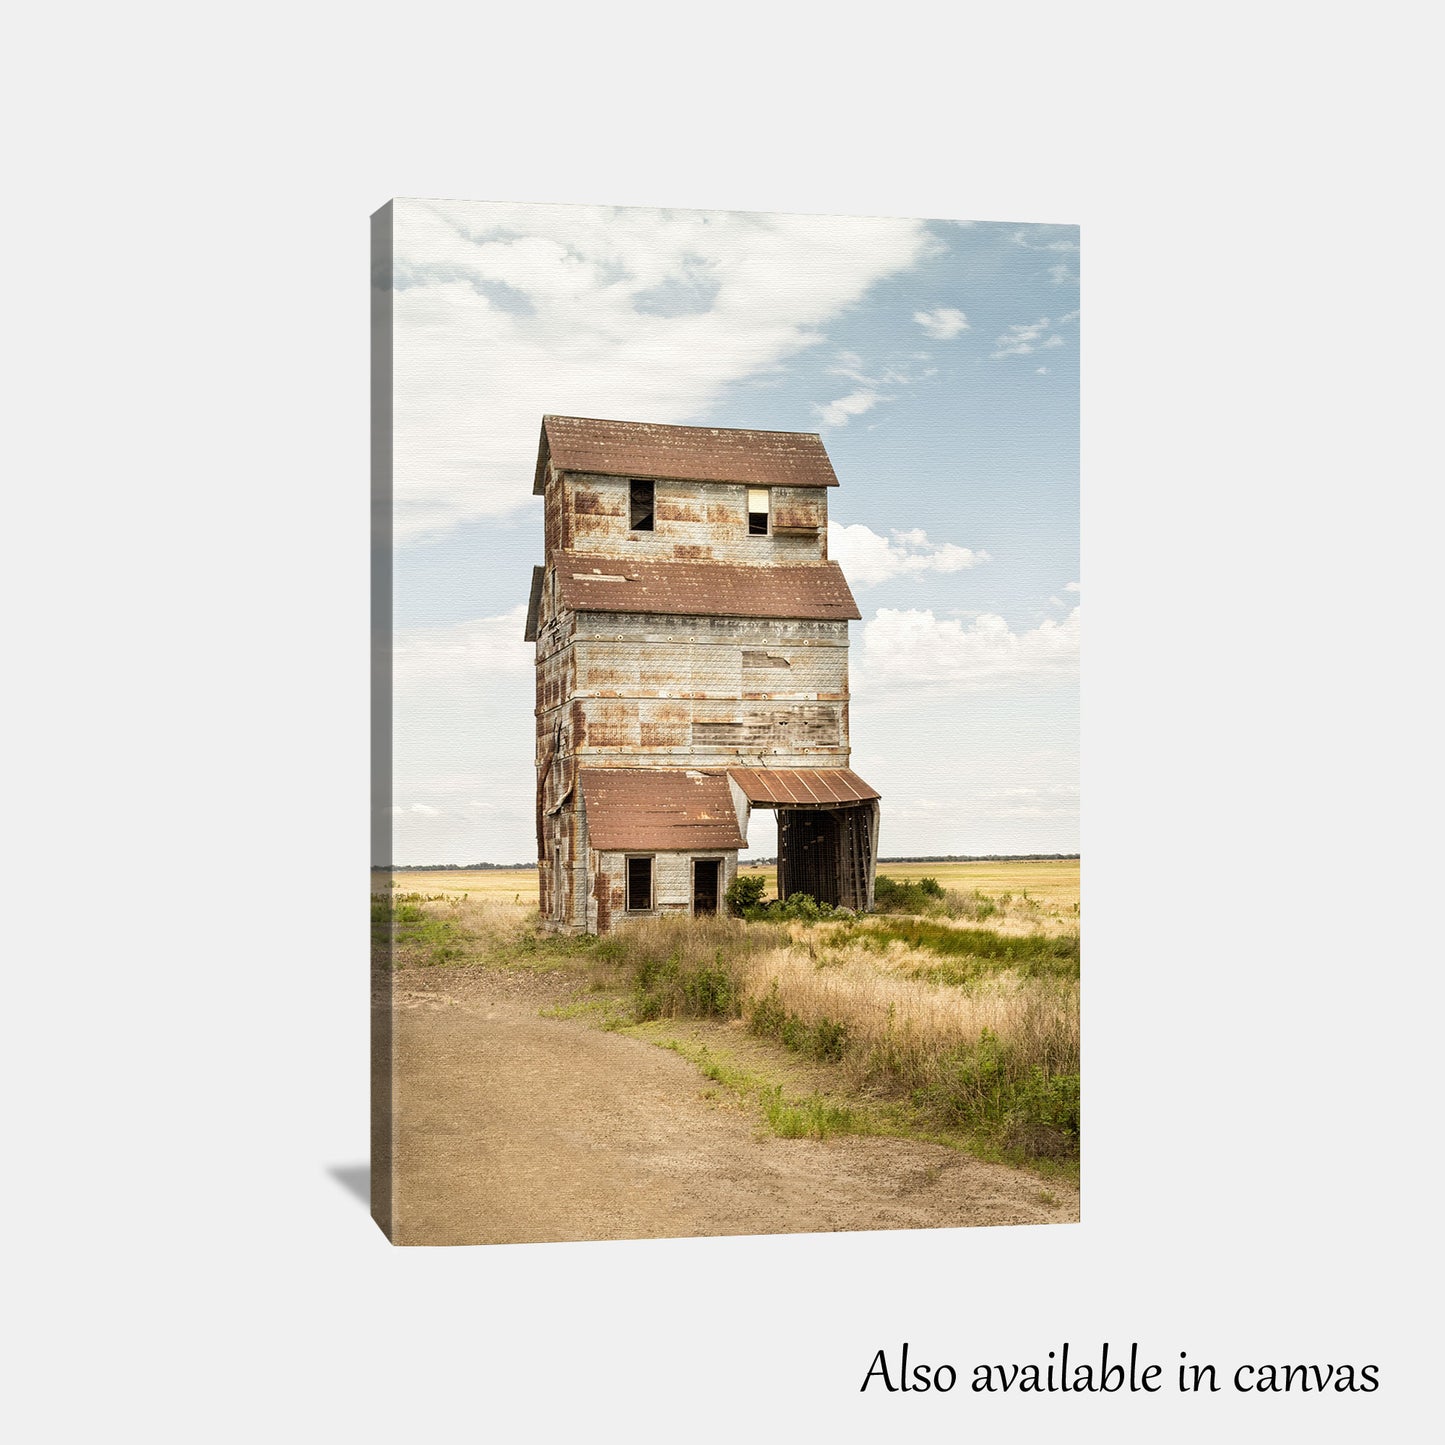 Photograph of the artwork beautifully presented on a gallery-wrapped canvas, suggesting an additional format option. This artwork is also available as a canvas print for those interested in a ready-to-hang solution.